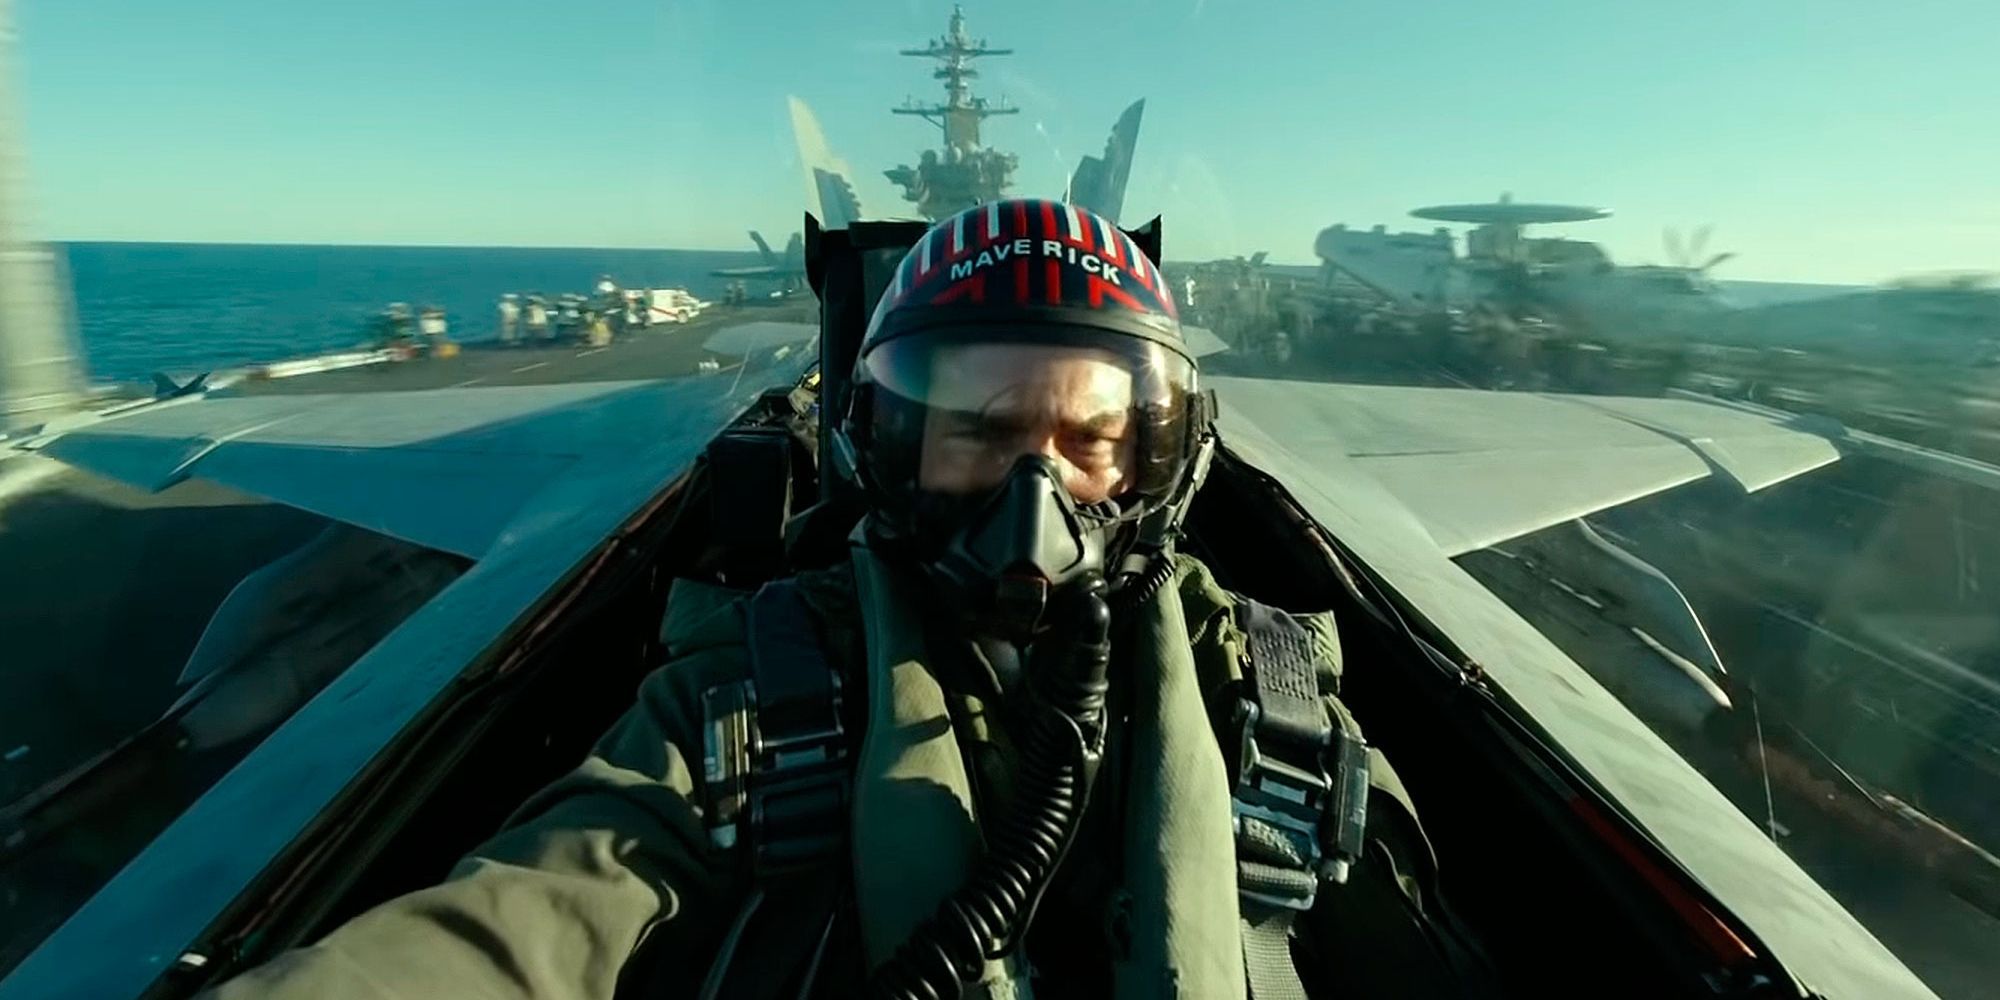 Maverick takes off from an aircraft carrier